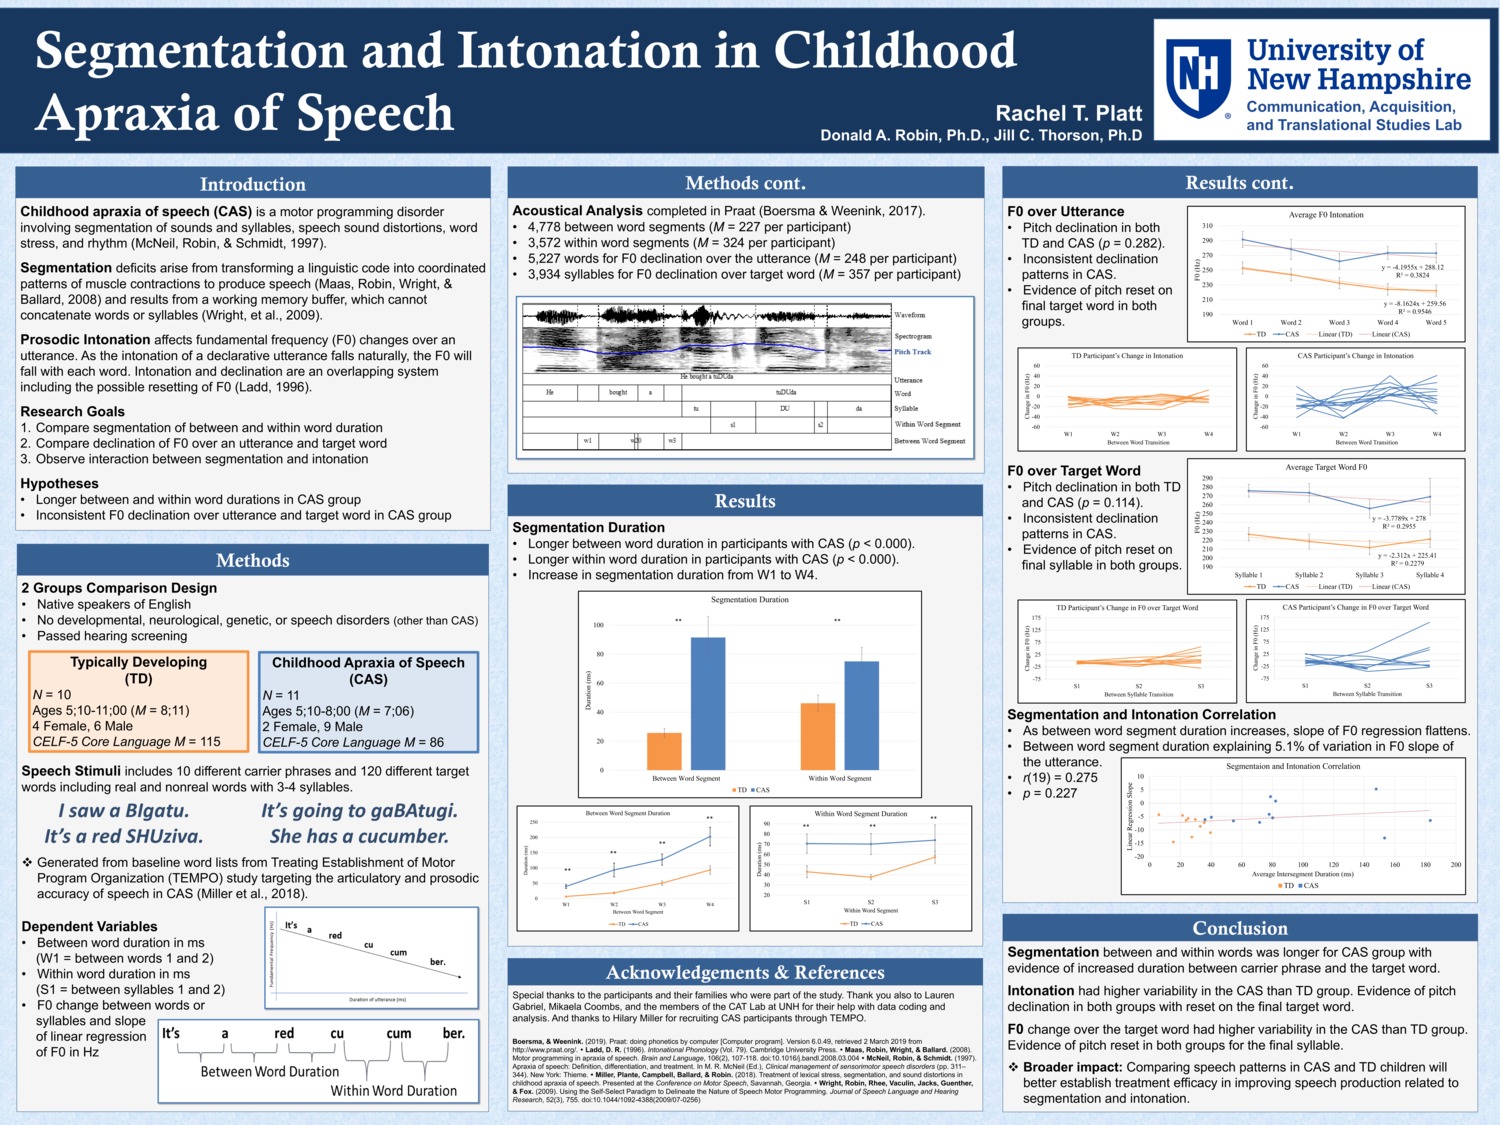 Segmentation And Intonation In Childhood Apraxia Of Speech by rtc225